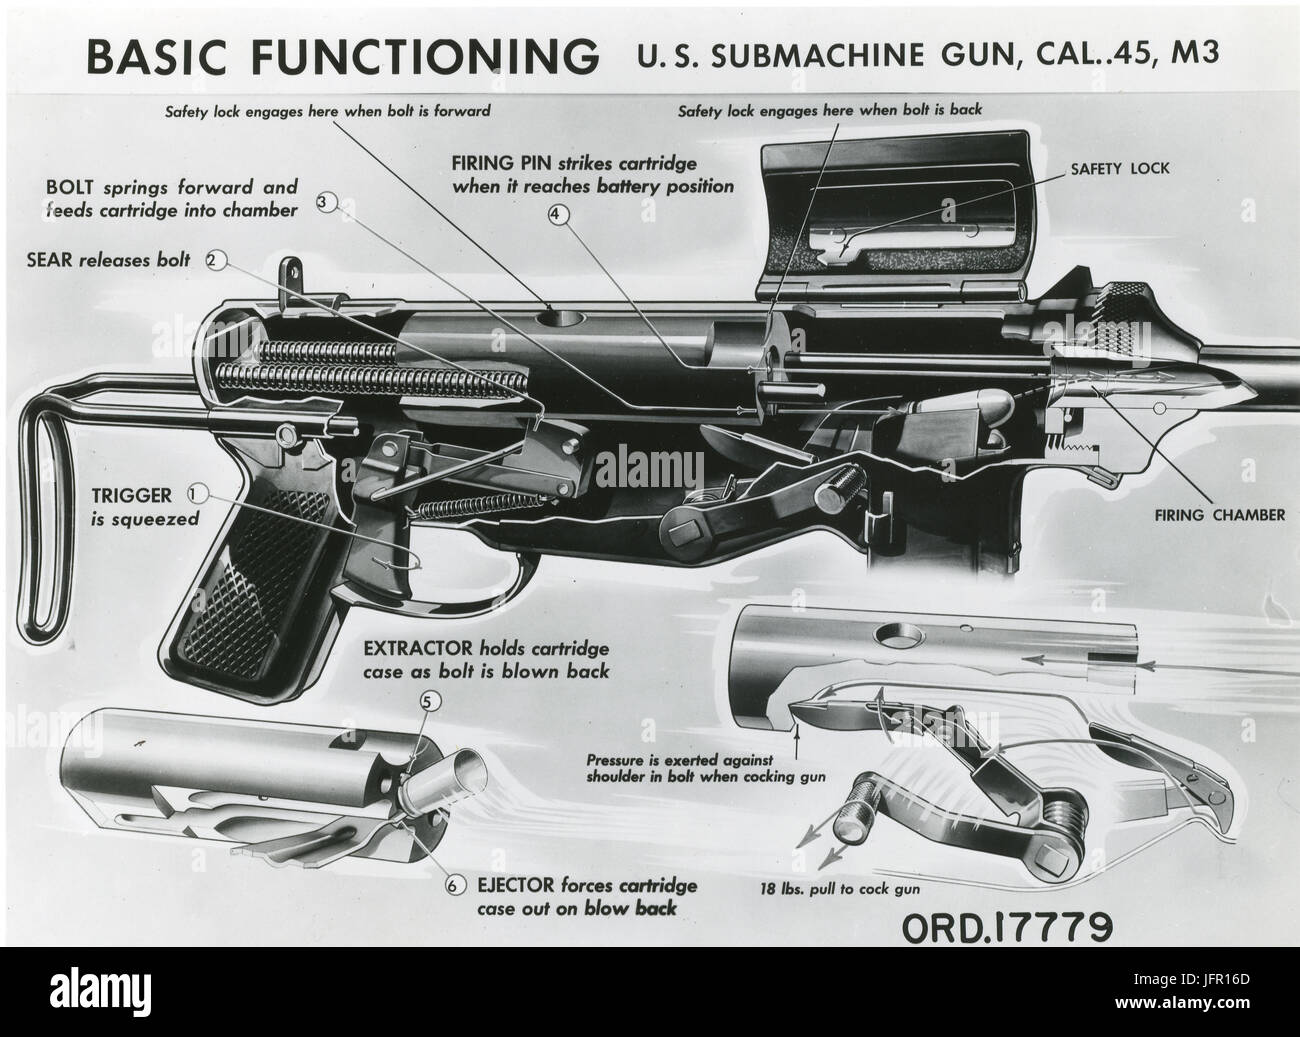 Basic Functioning diagram for the U.S. Cal. .45, M3 submachine gun. Also known as the Grease Gun. 1940s Stock Photo